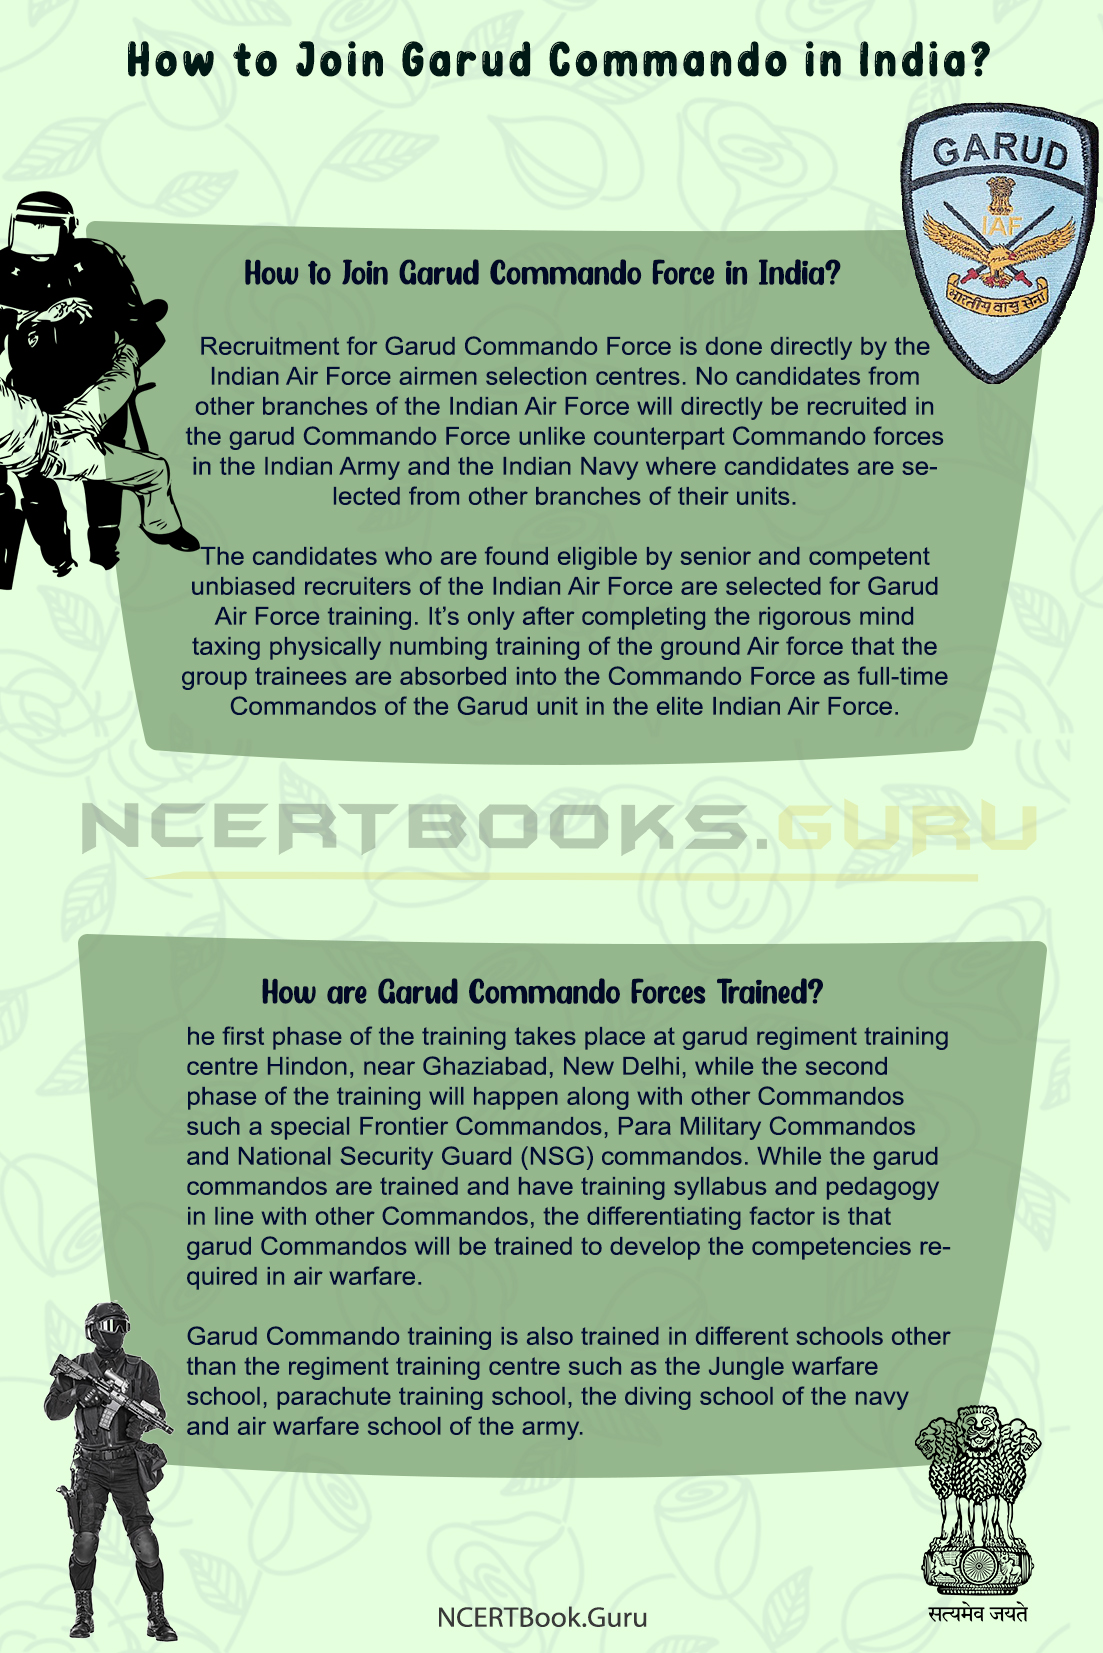 How to Join Garud Commando in India 2